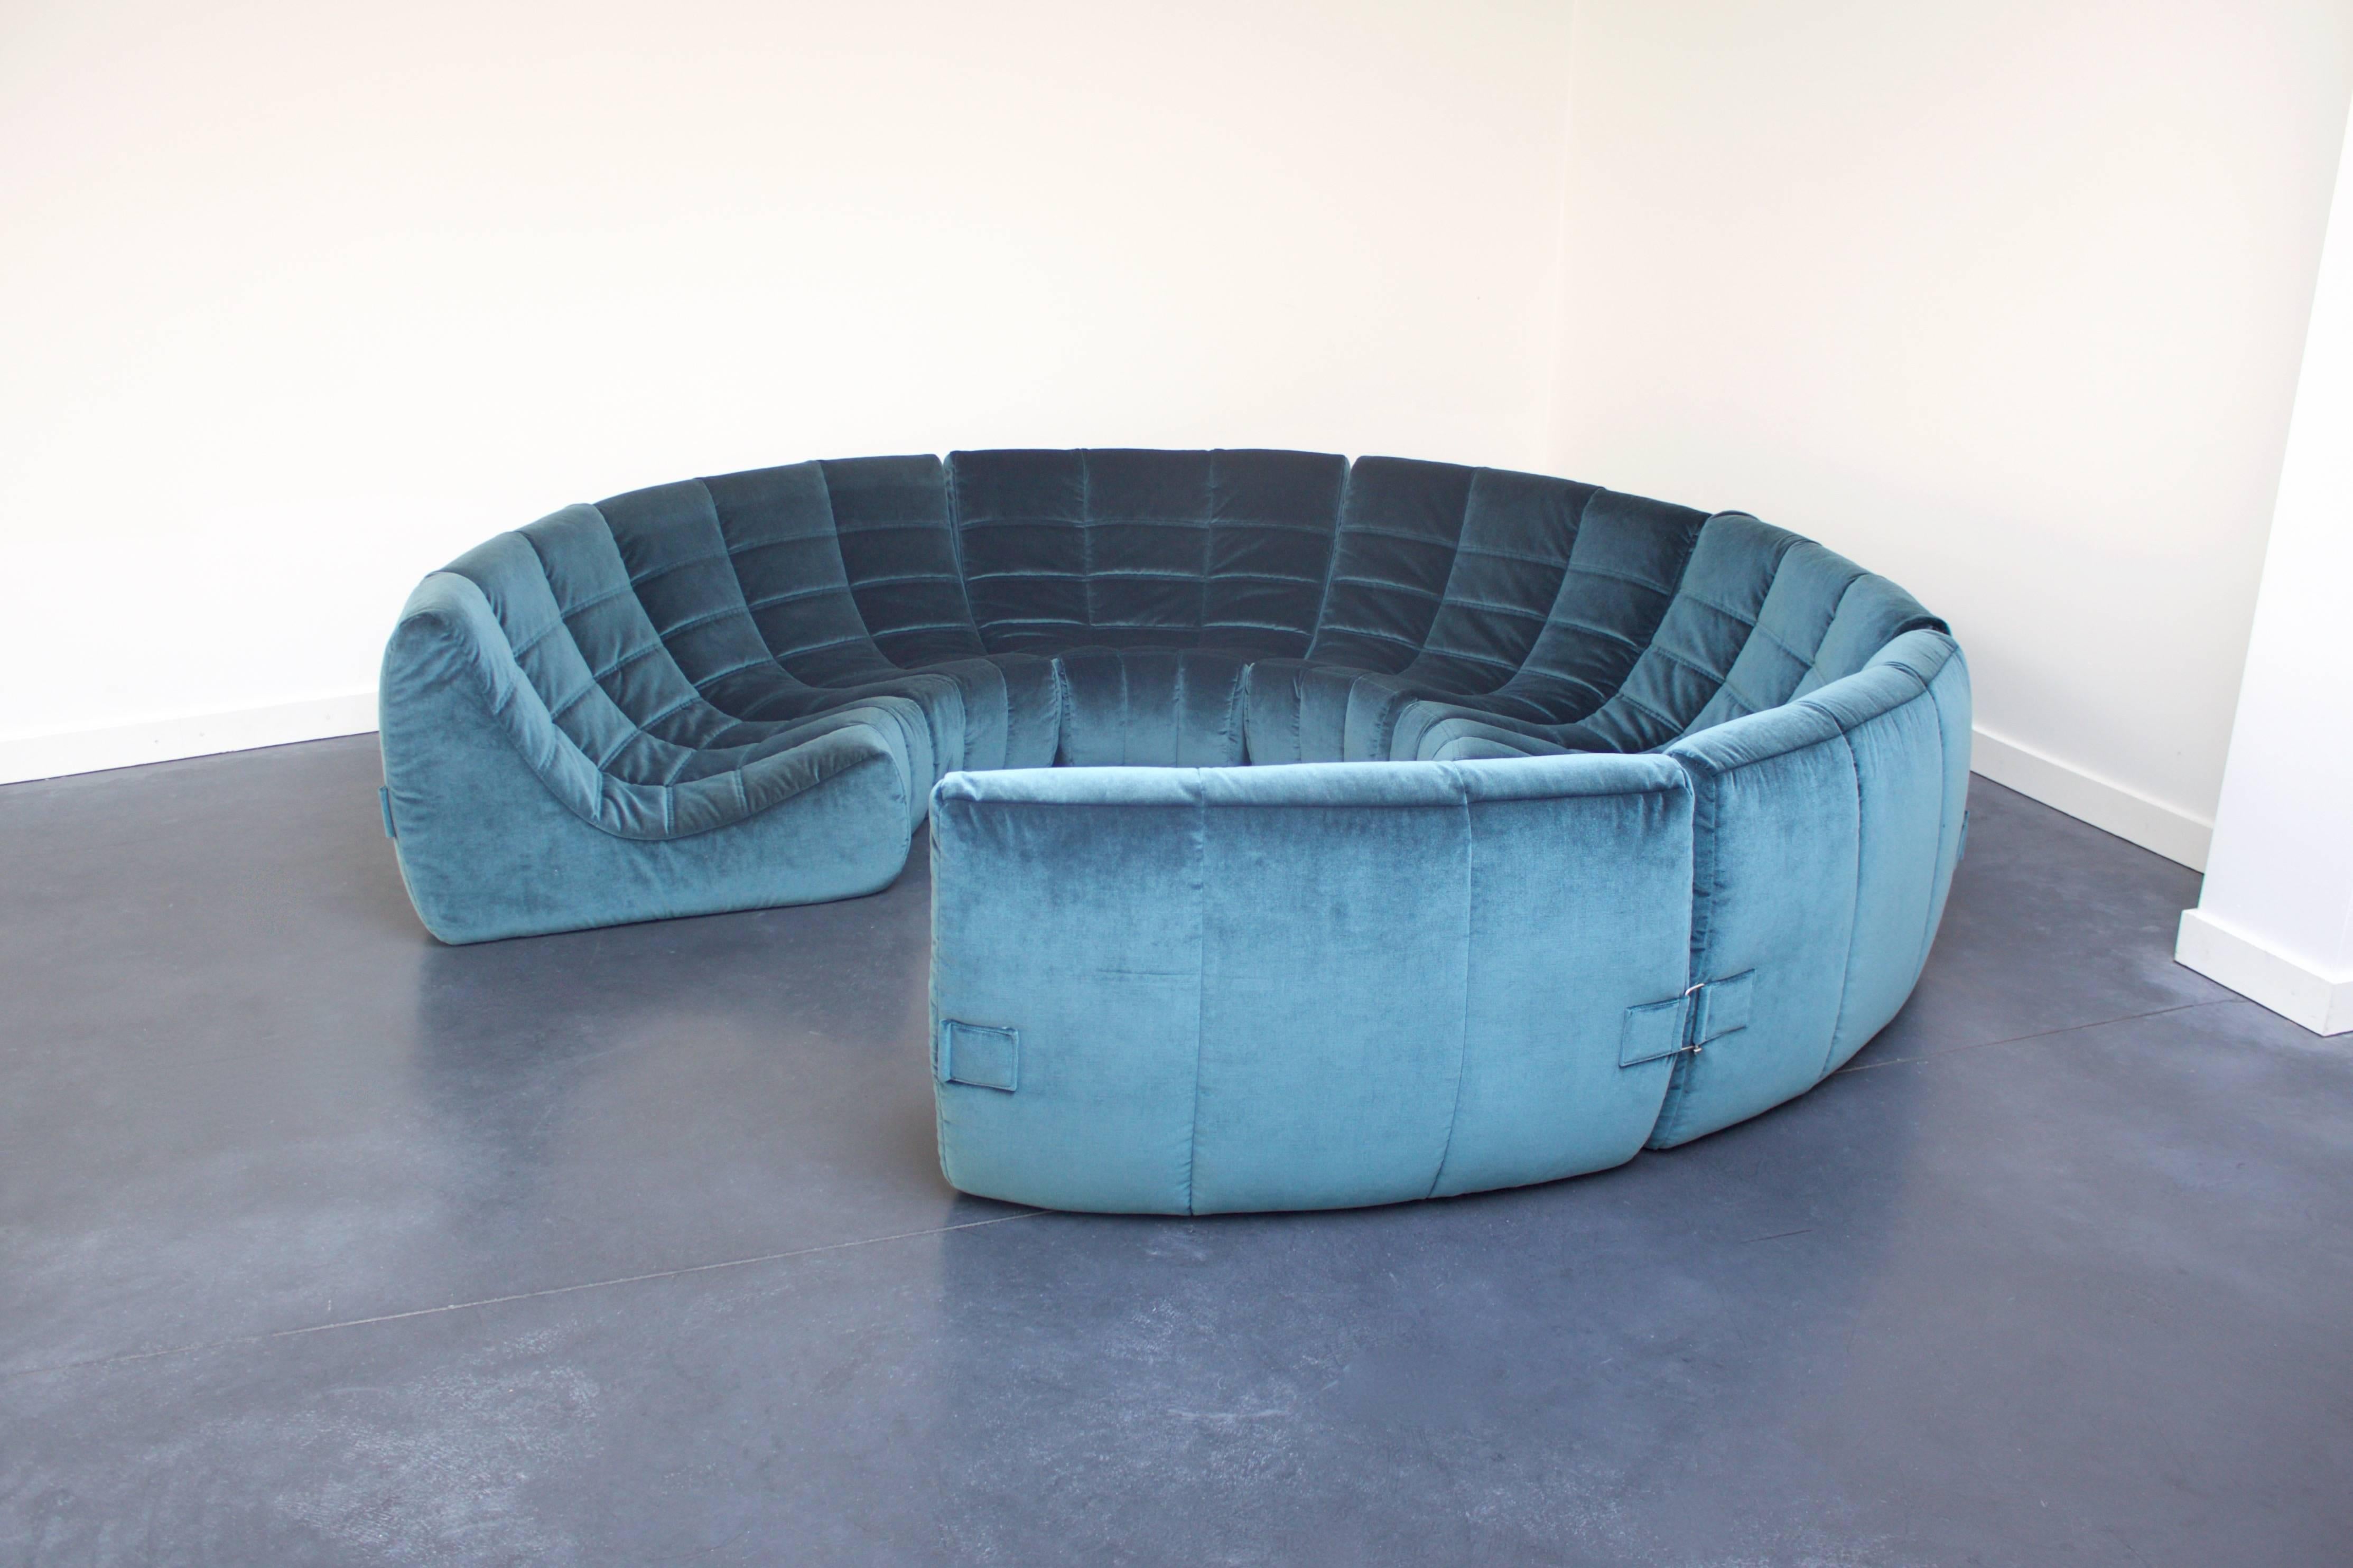 Rare and Exceptional 'Gilda' Circle Sofa in Velvet by Michel Ducaroy, 1972 In Excellent Condition For Sale In Echt, NL